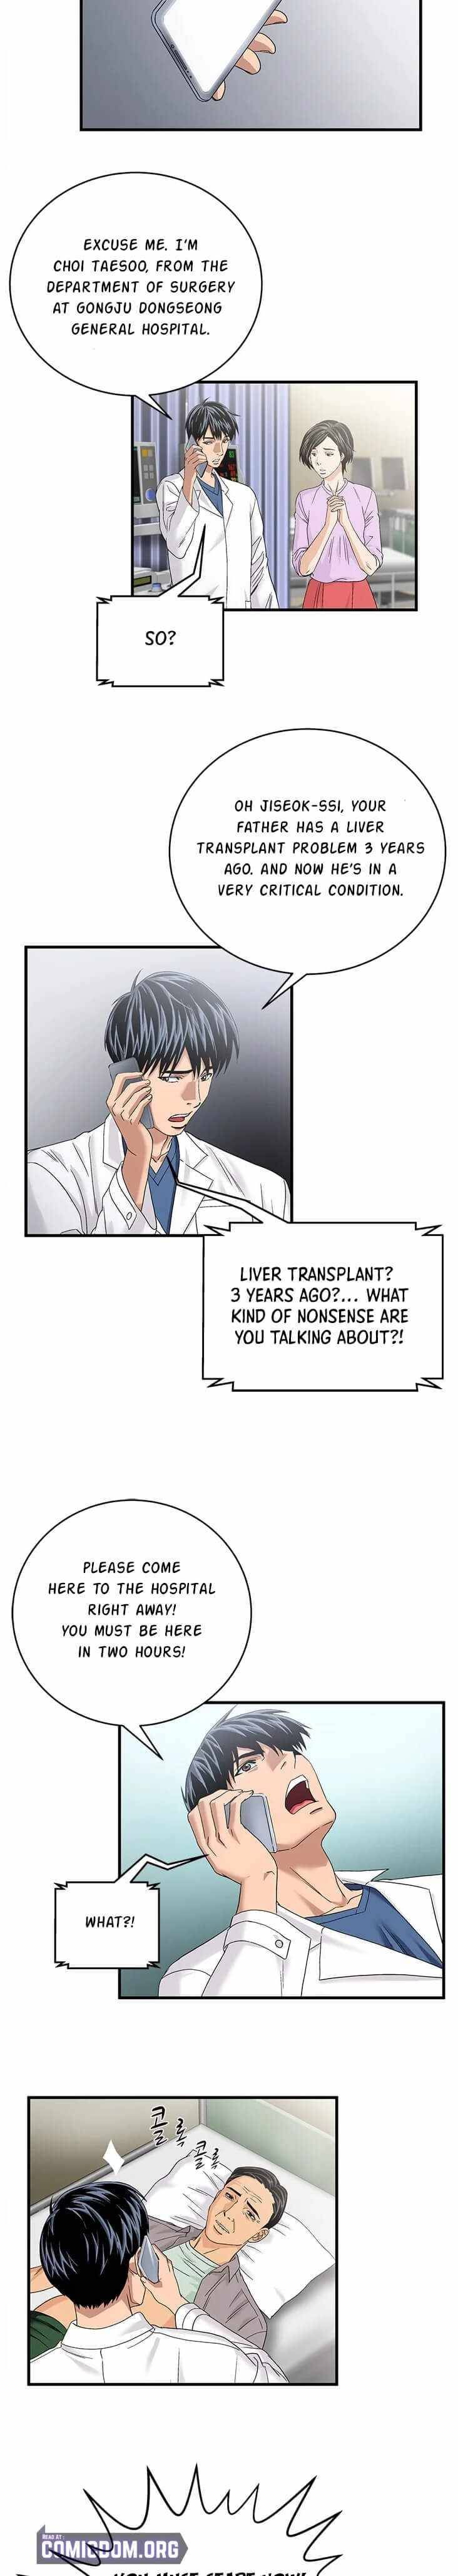 Dr. Choi Tae-Soo Chapter 77 page 5